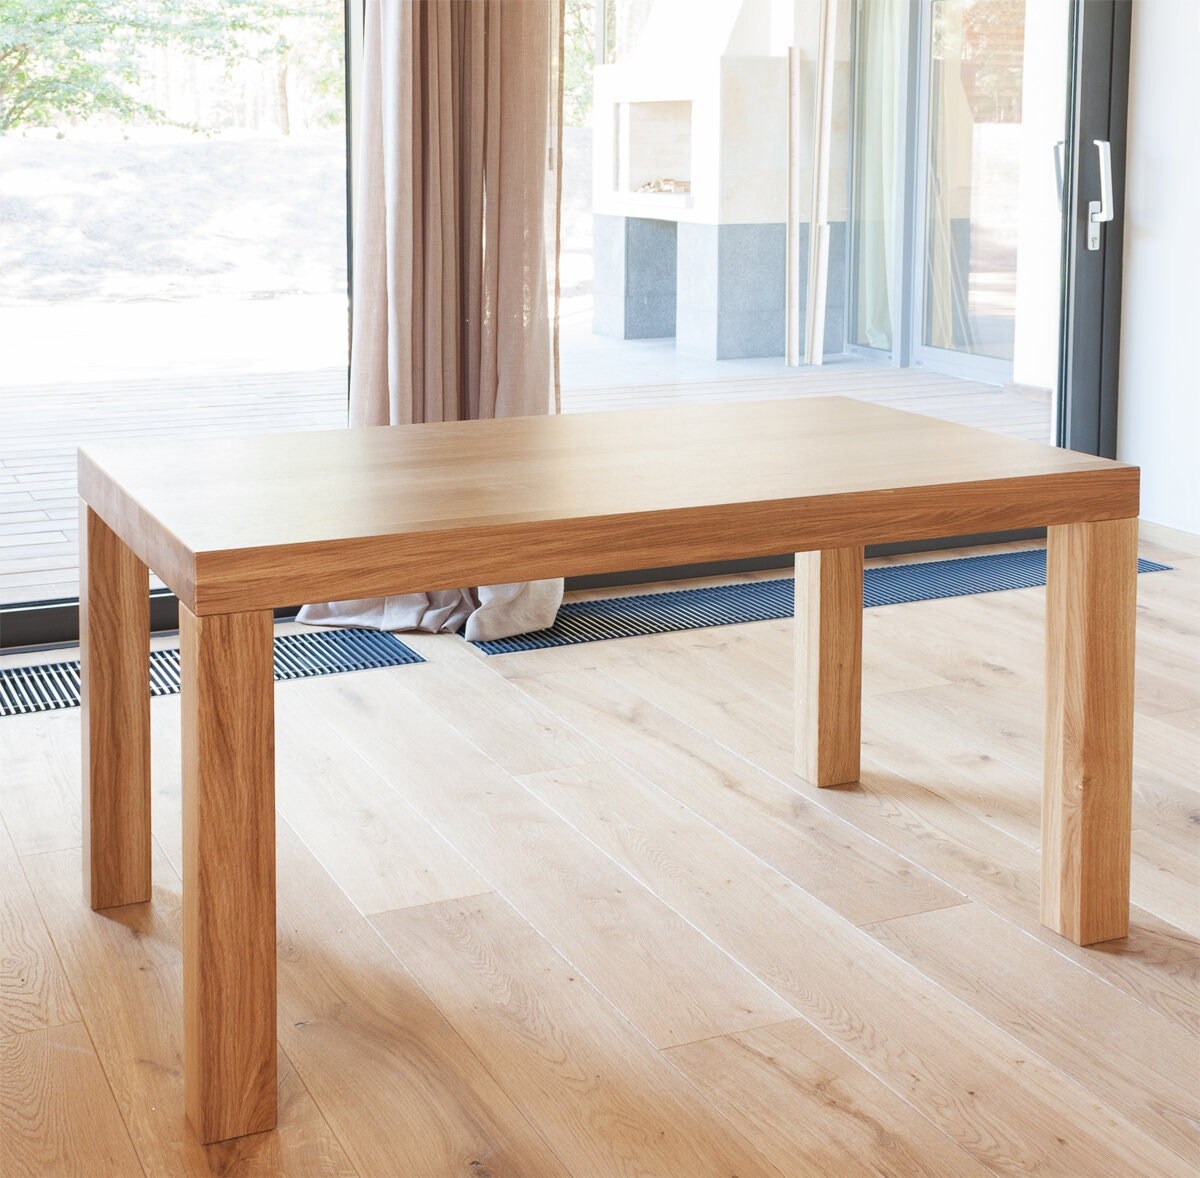 SIMPLE Rectangular wooden table By Very Wood